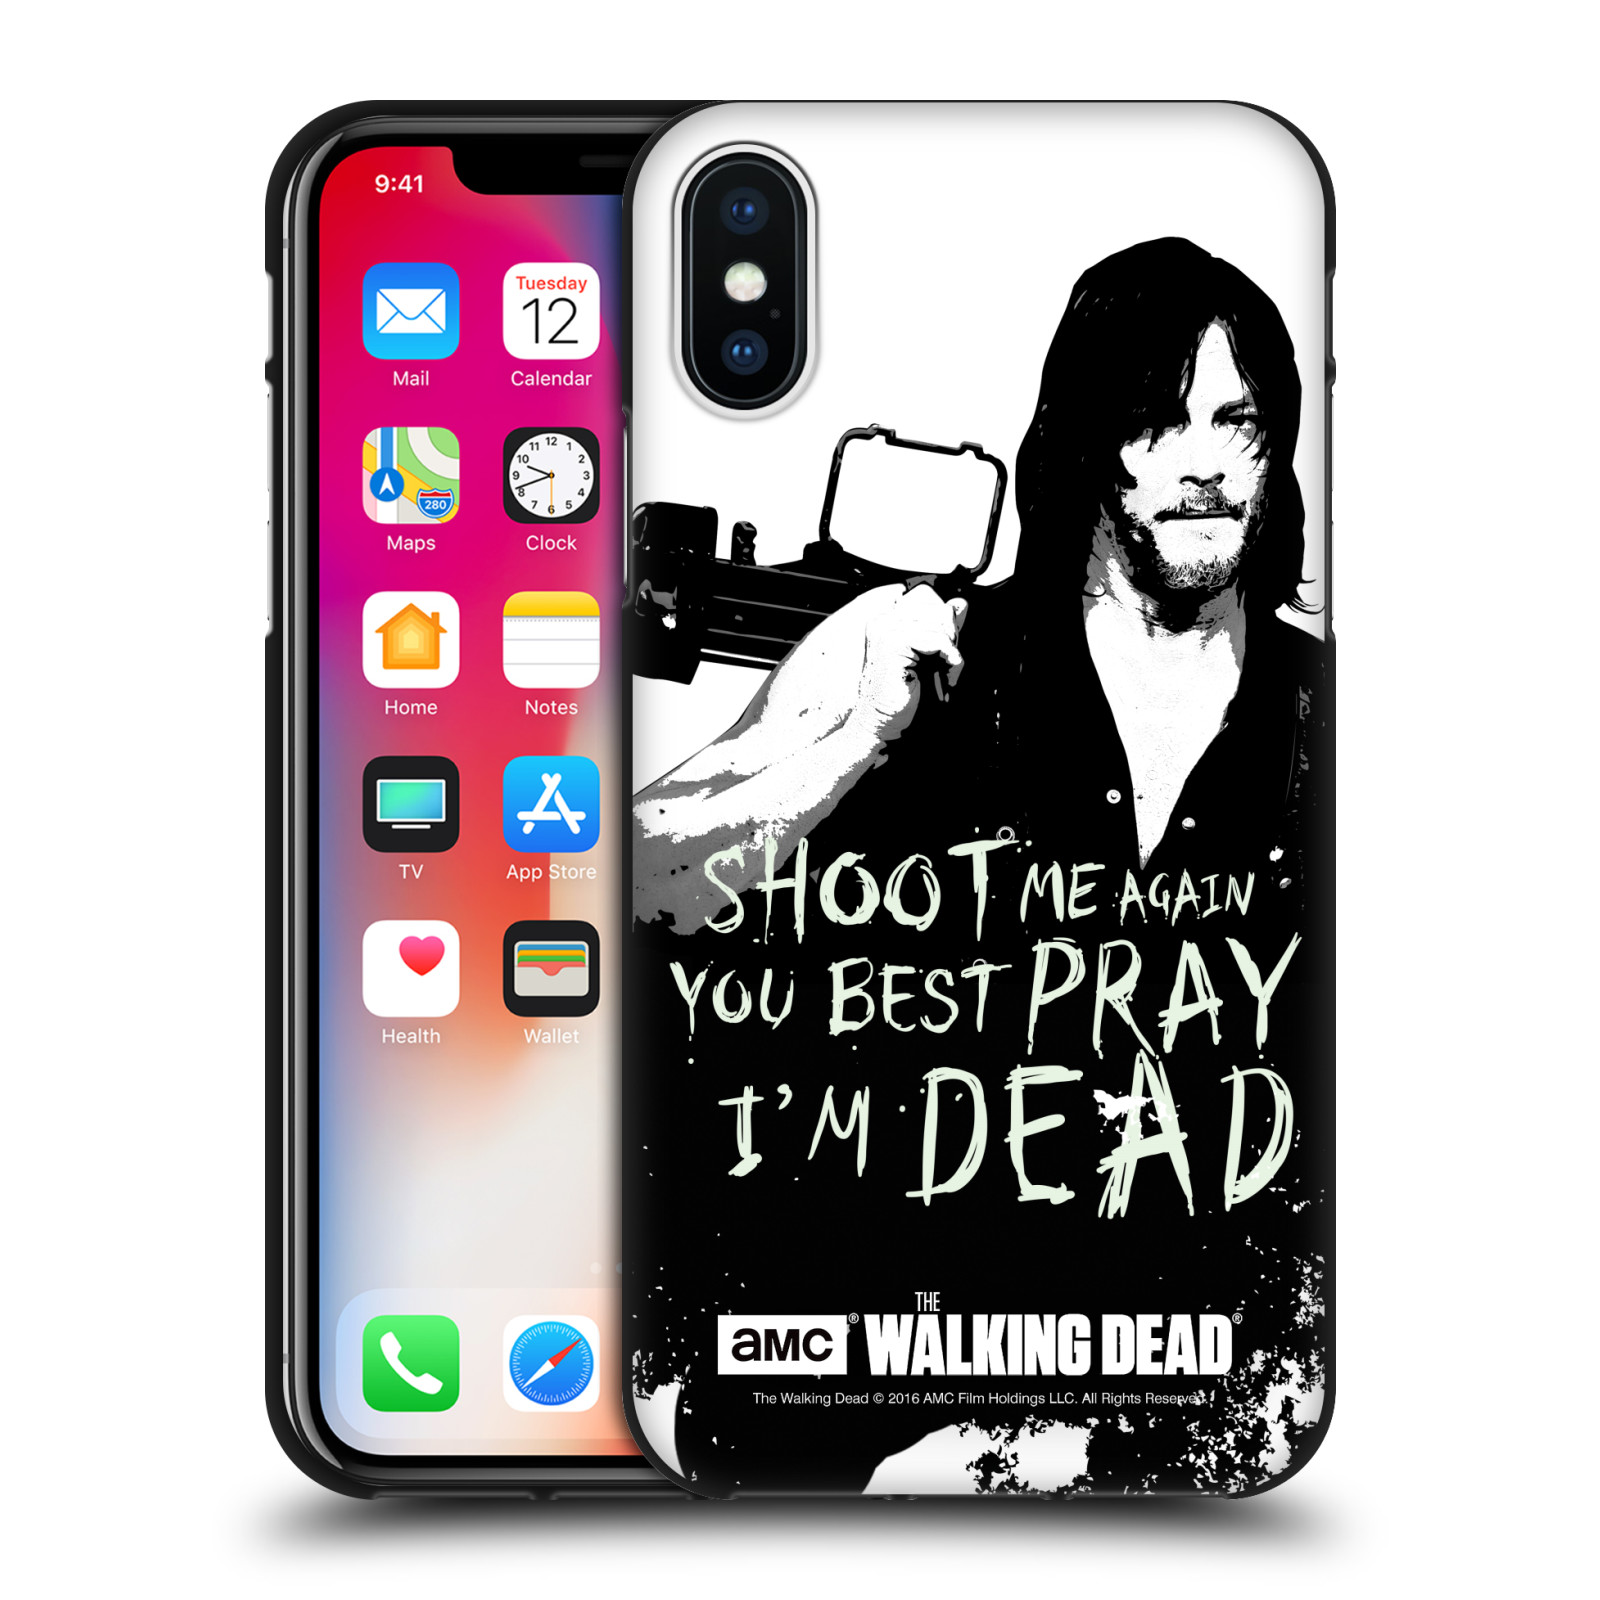 AMC THE WALKING DEAD SEASON 9 QUOTES SOFT GEL CASE FOR APPLE iPHONE PHONES